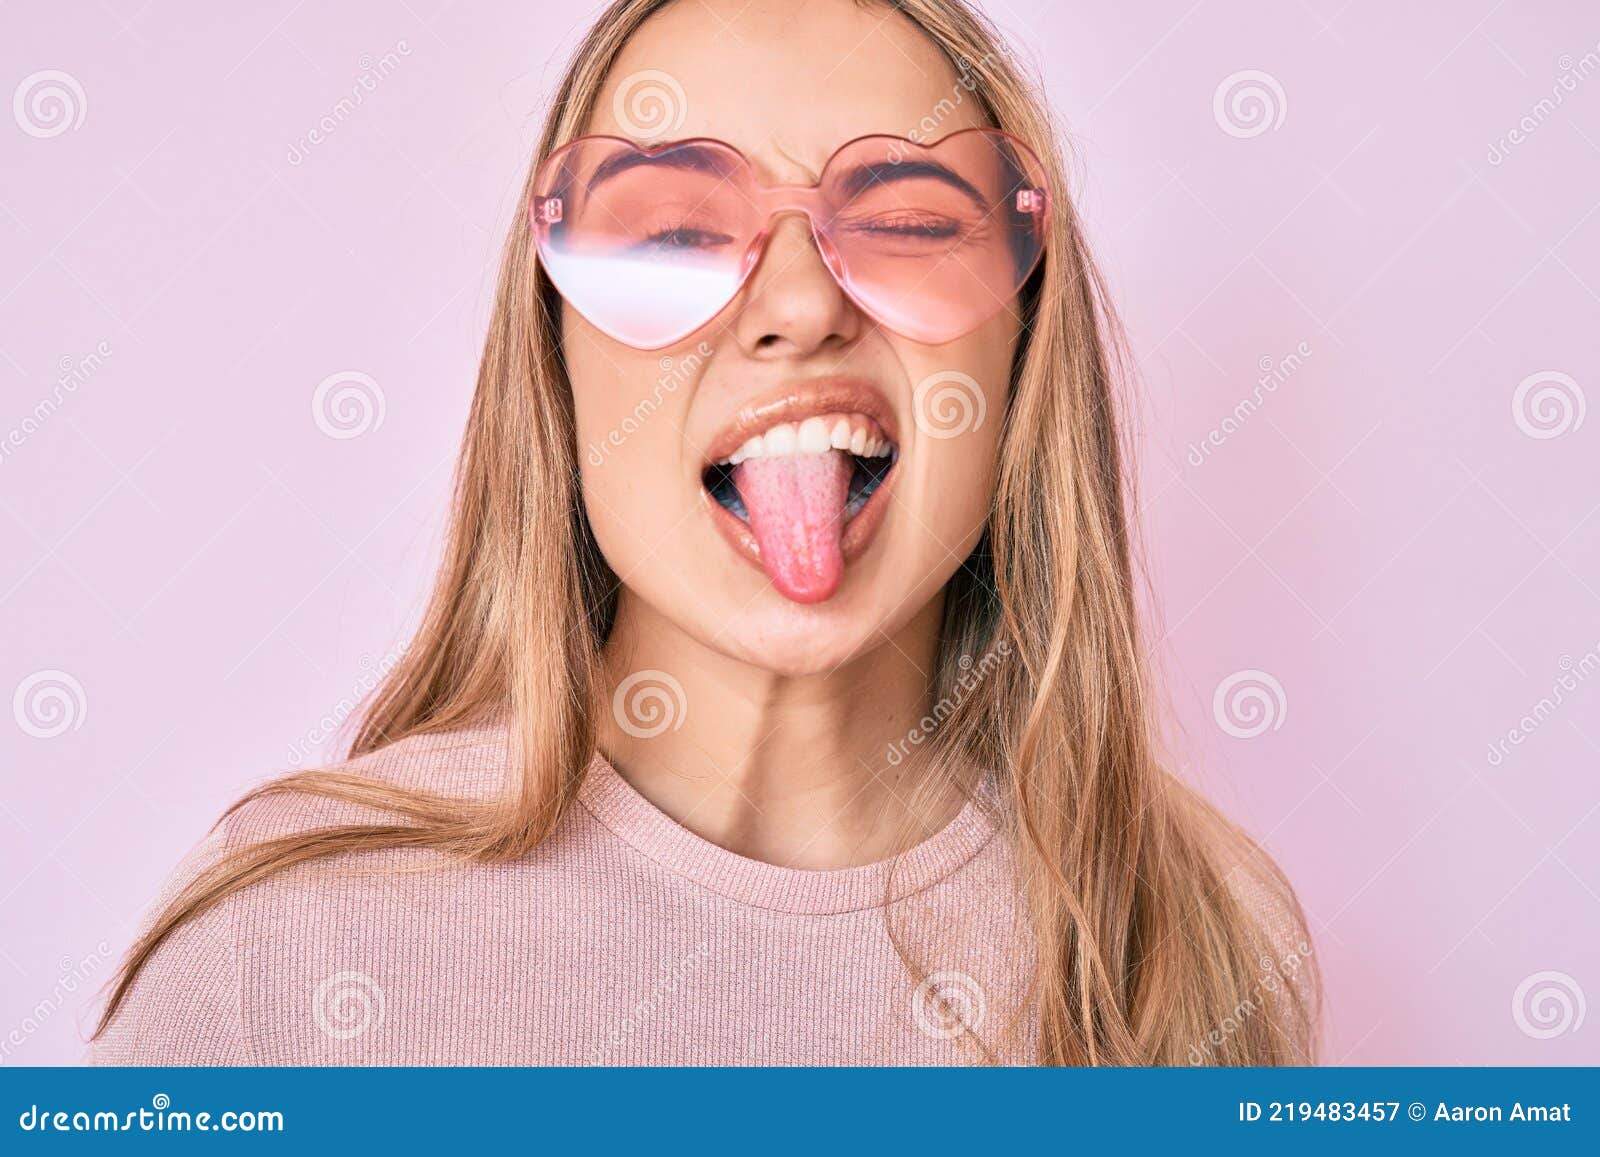 Young Beautiful Blonde Woman Wearing Heart Shaped Sunglasses Sticking Tongue Out Happy With 